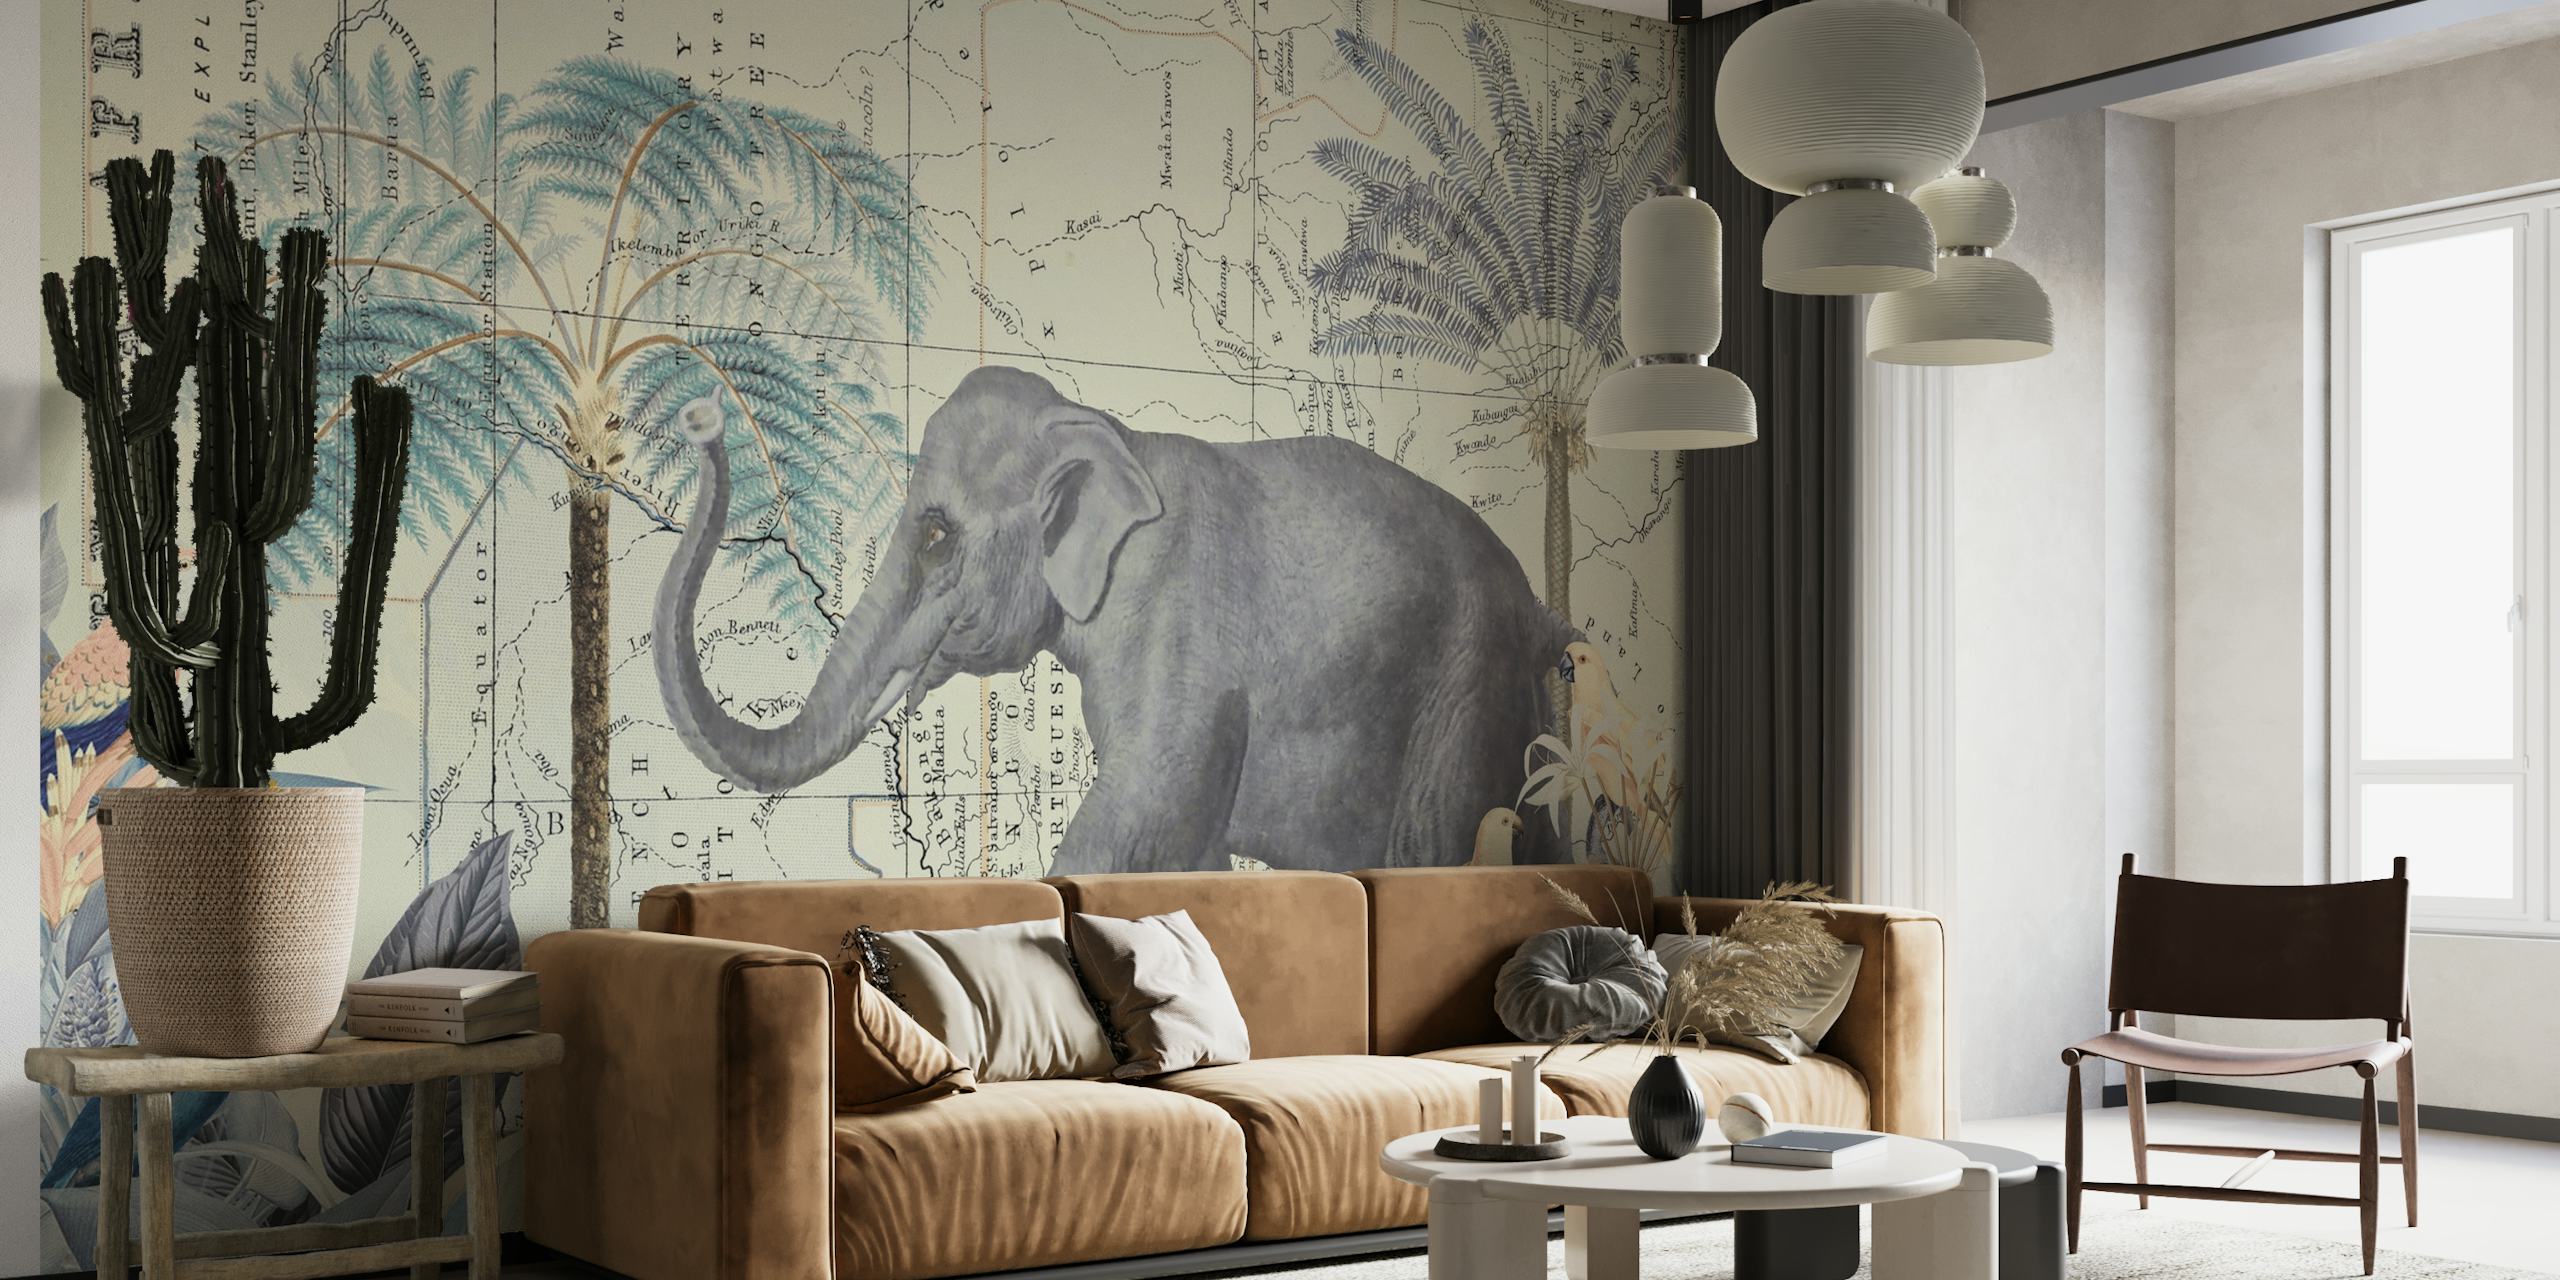 Elephant walking through tropical plants on a detailed wall mural